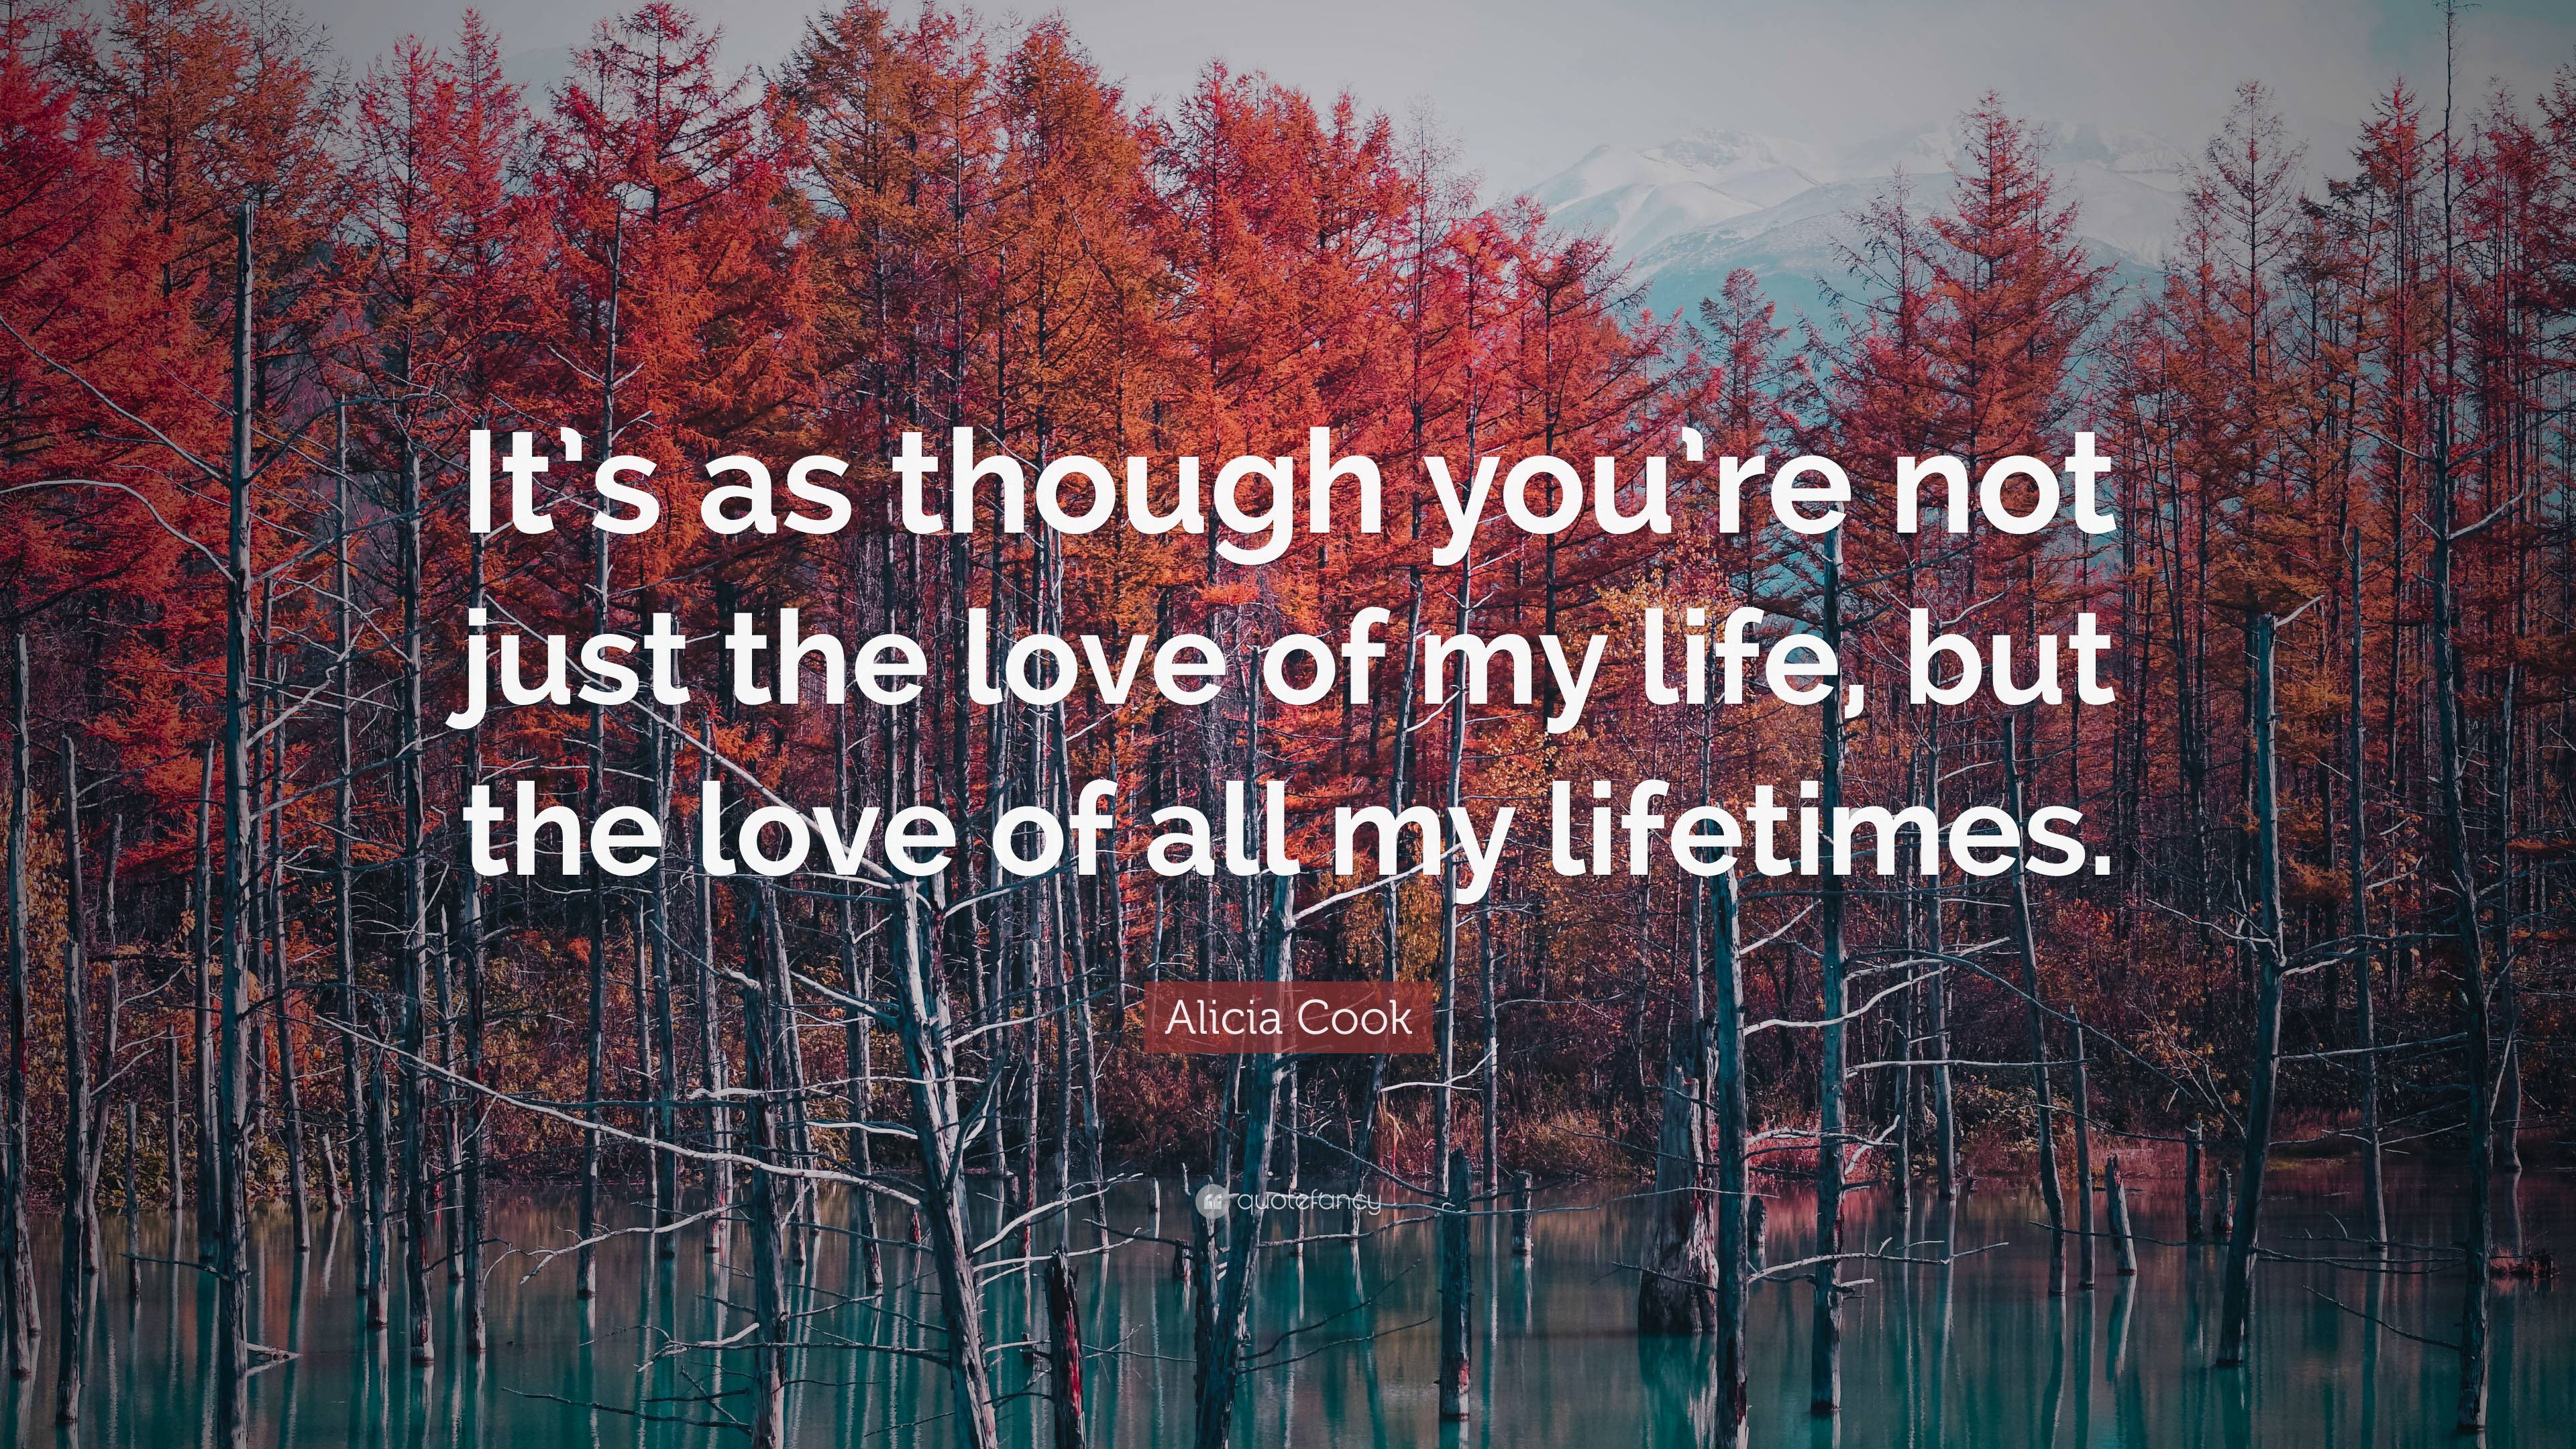 Alicia Cook Quote: “It’s as though you’re not just the love of my life ...